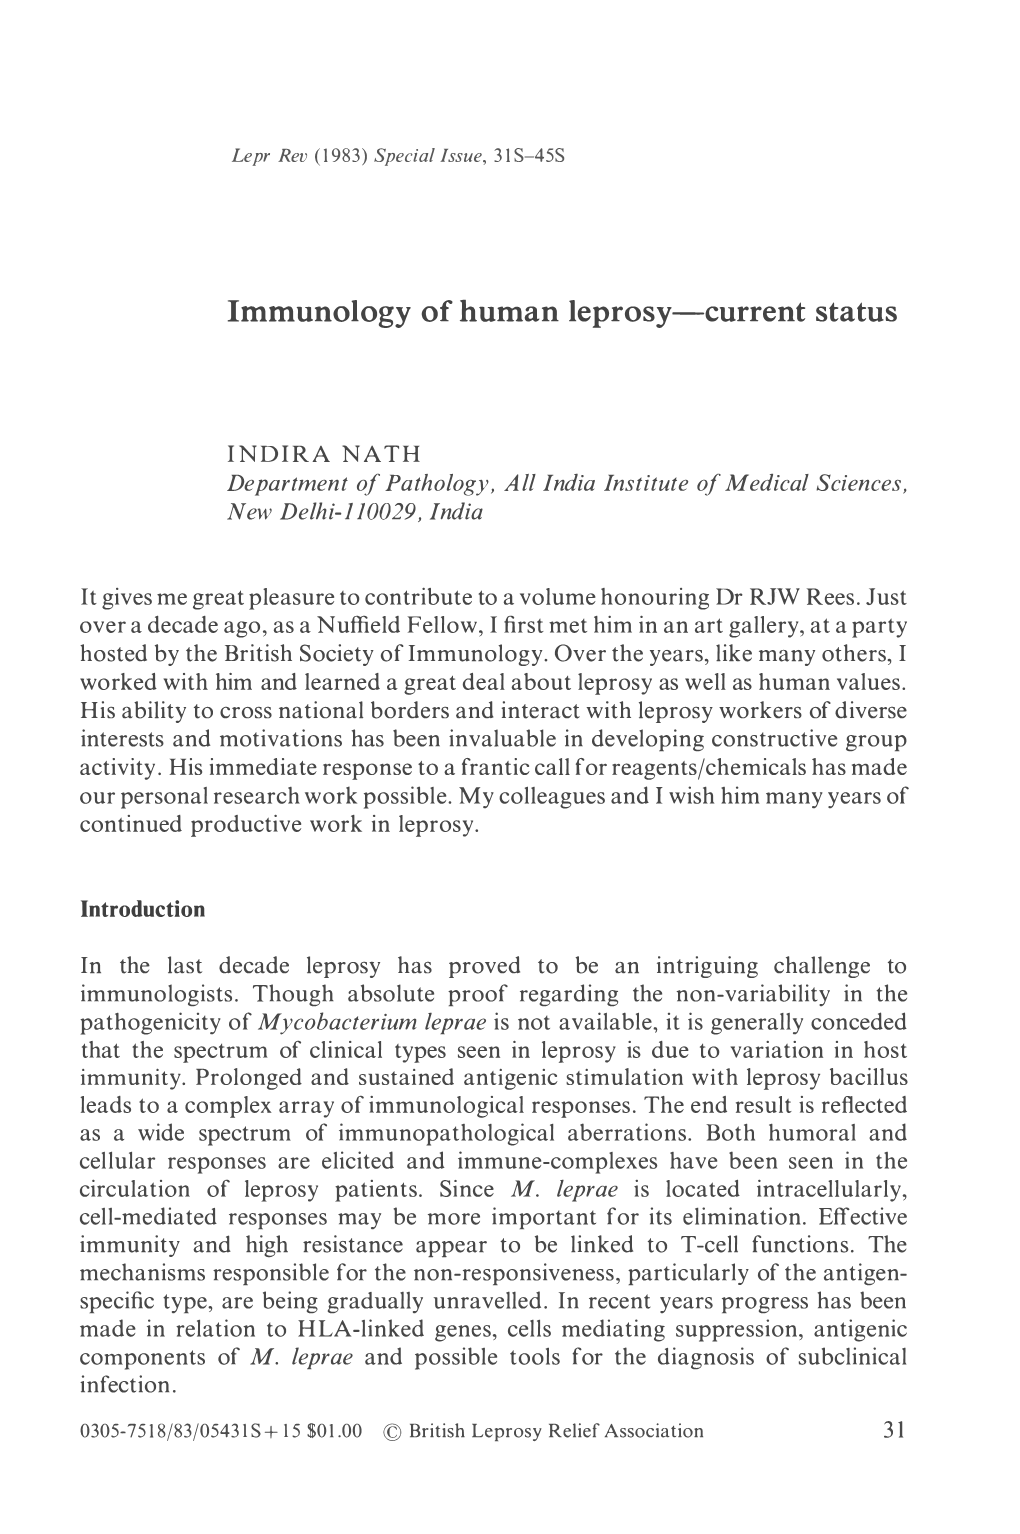 Immunology of Human Leprosy-Current Status INDIRA NATH Department Of